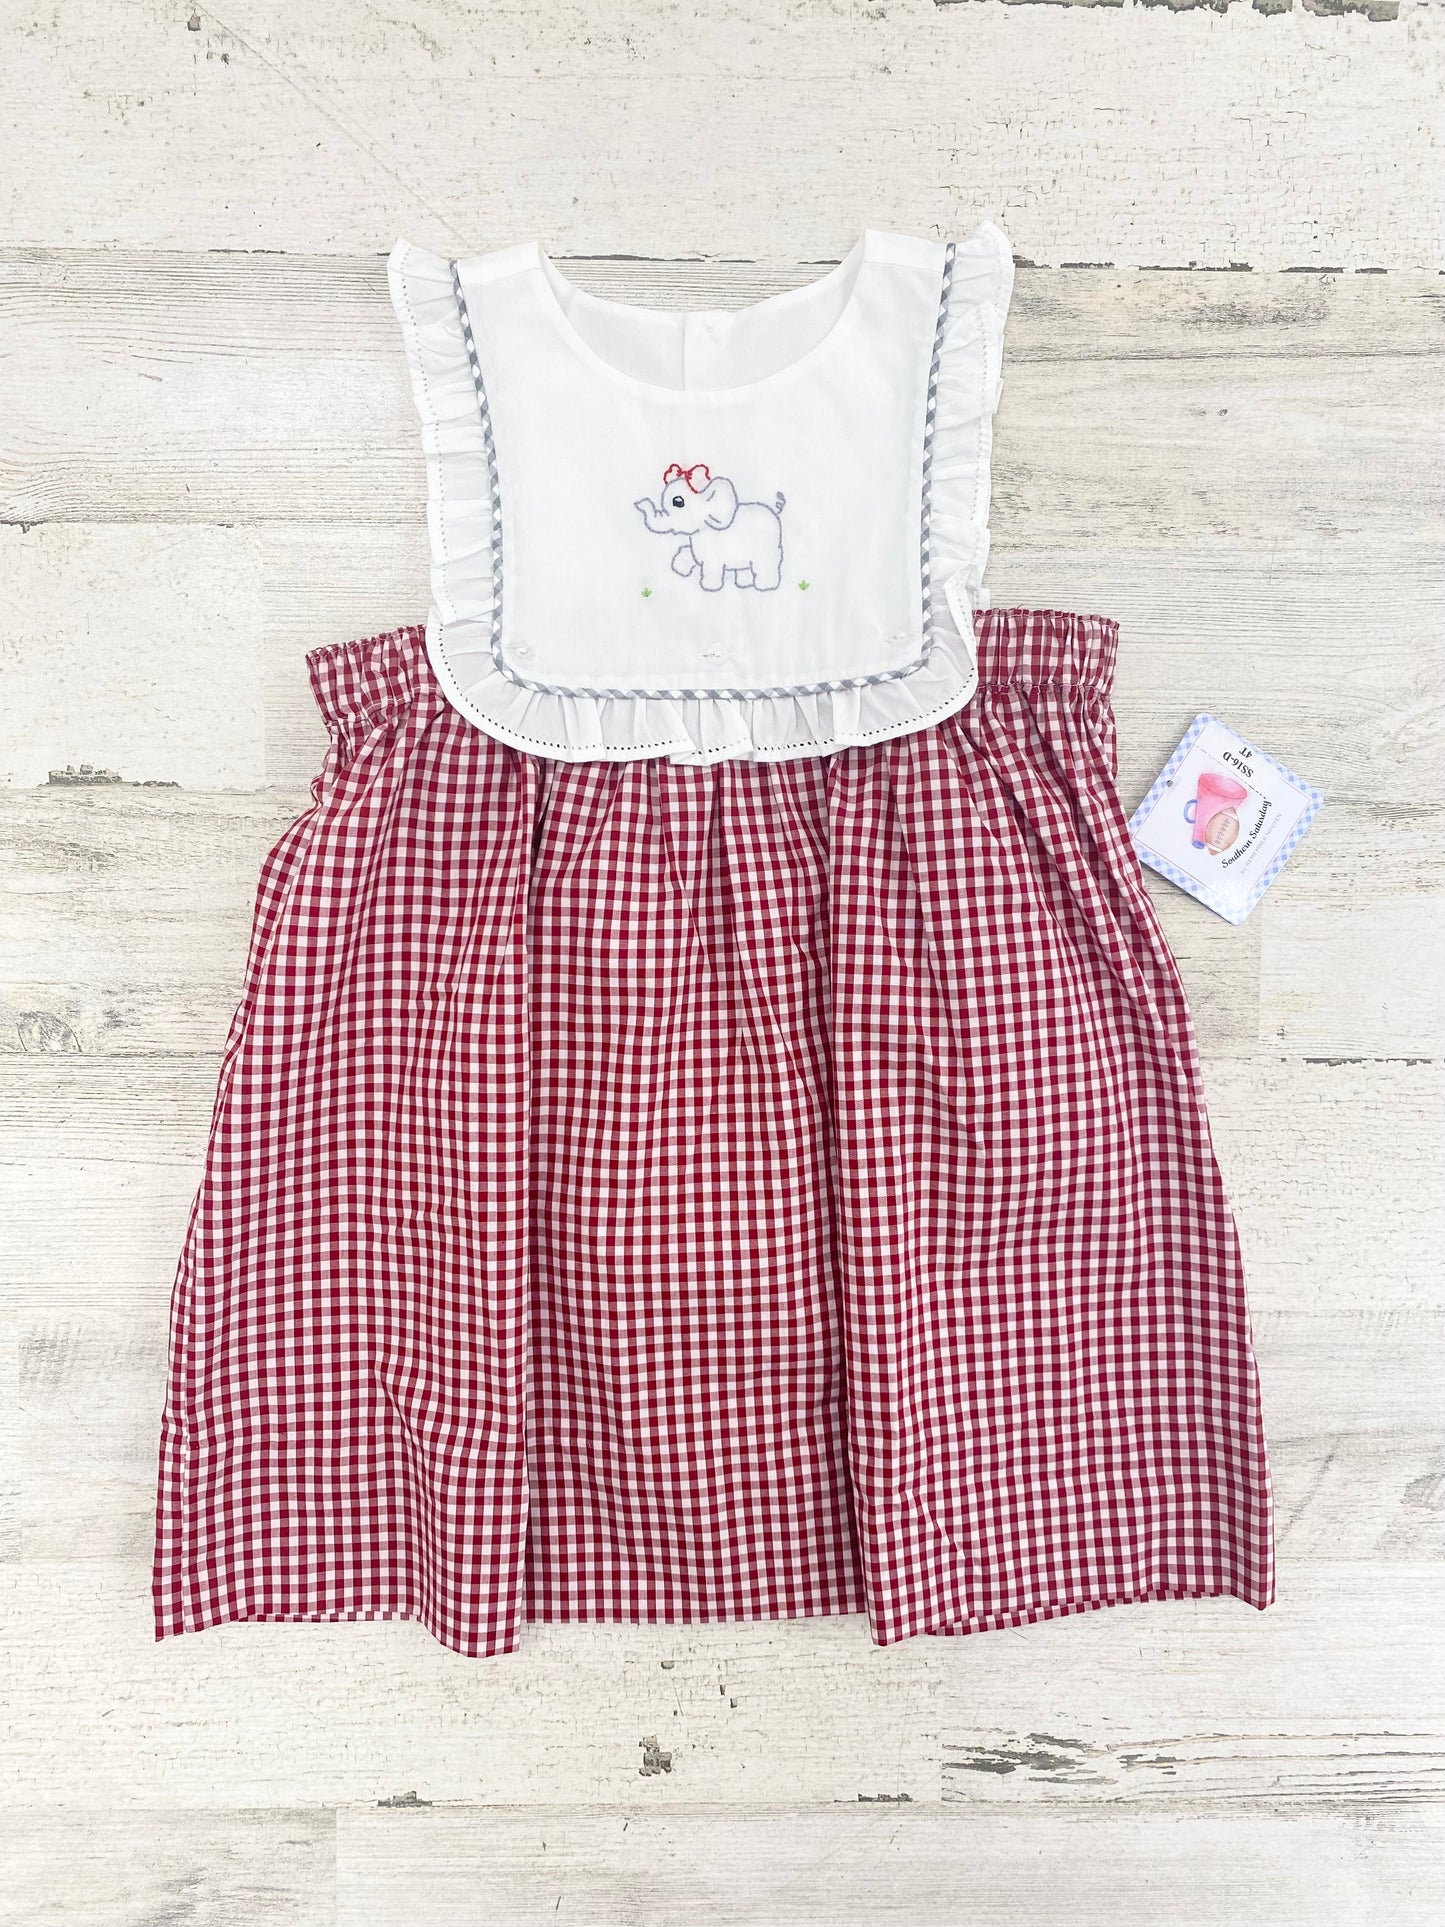 SSRN Embroidery Dress Crimson/Gray Gingham